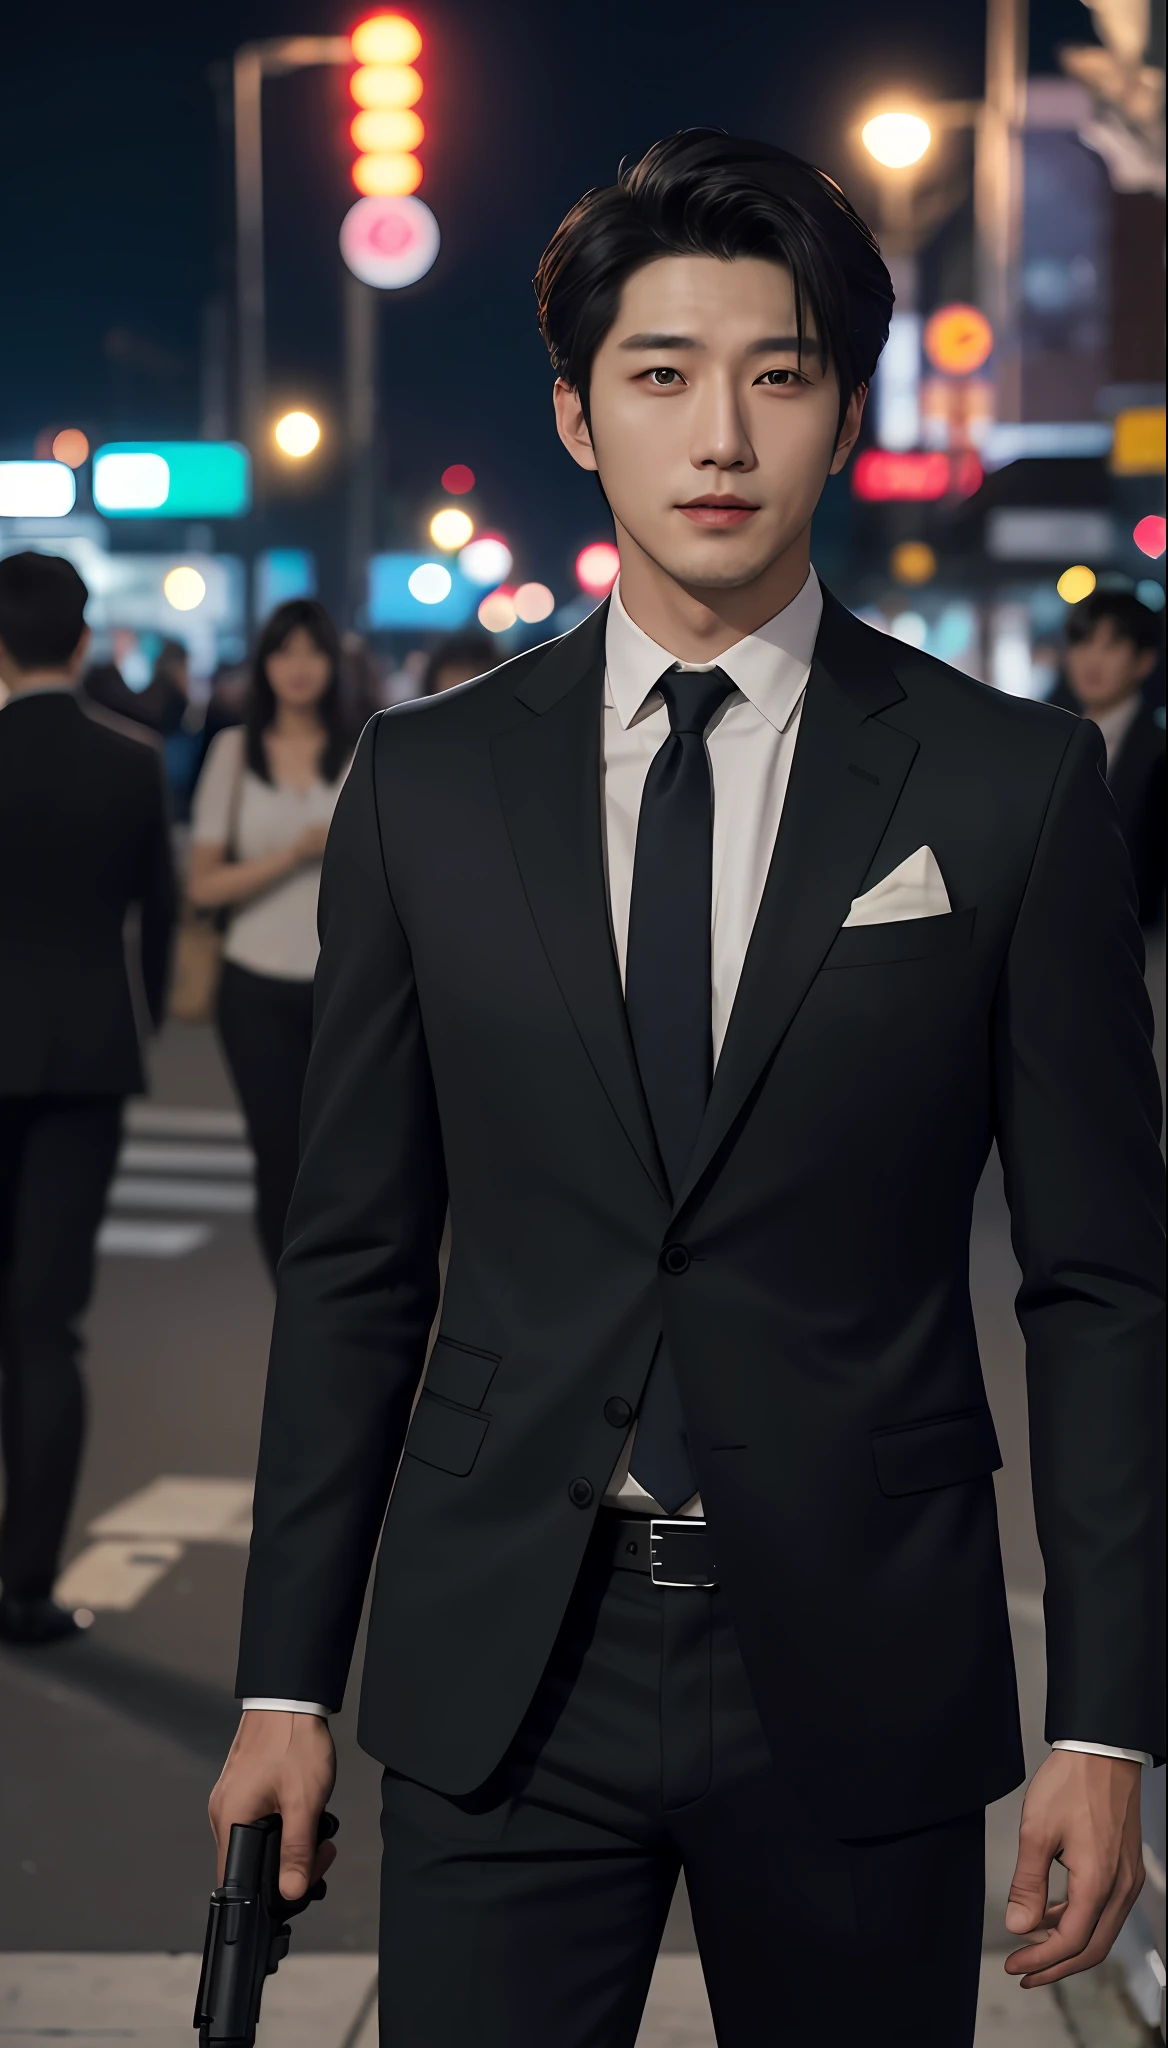 movie stills, RAW photos, absurd, high quality, realistic, detailed, realistic, outdoor, street lights, night, harsh lighting, magical photos, dramatic lighting, photorealism, ultra-detail, 35mm, f/2.8, 8K UHD, DSLR, Film Grain, Handsome Korean actor in suit, holding a gun looking straight ahead with sexy expression